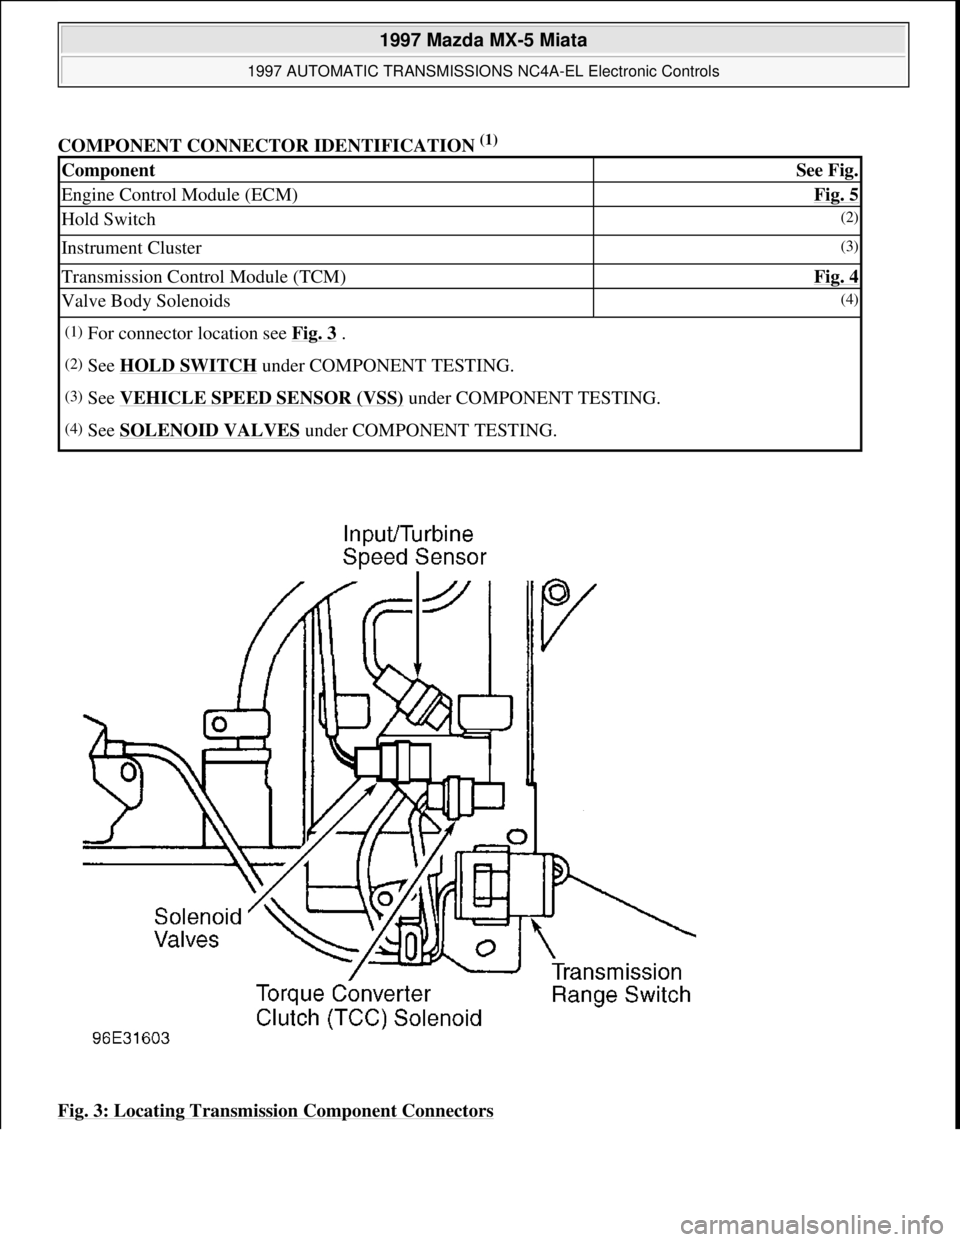 MAZDA MIATA 1997  Factory Repair Manual COMPONENT CONNECTOR IDENTIFICATION (1) 
Fig. 3: Locating Transmission Component Connectors
ComponentSee Fig.
Engine Control Module (ECM)Fig. 5
Hold Switch(2)
Instrument Cluster(3)
Transmission Control